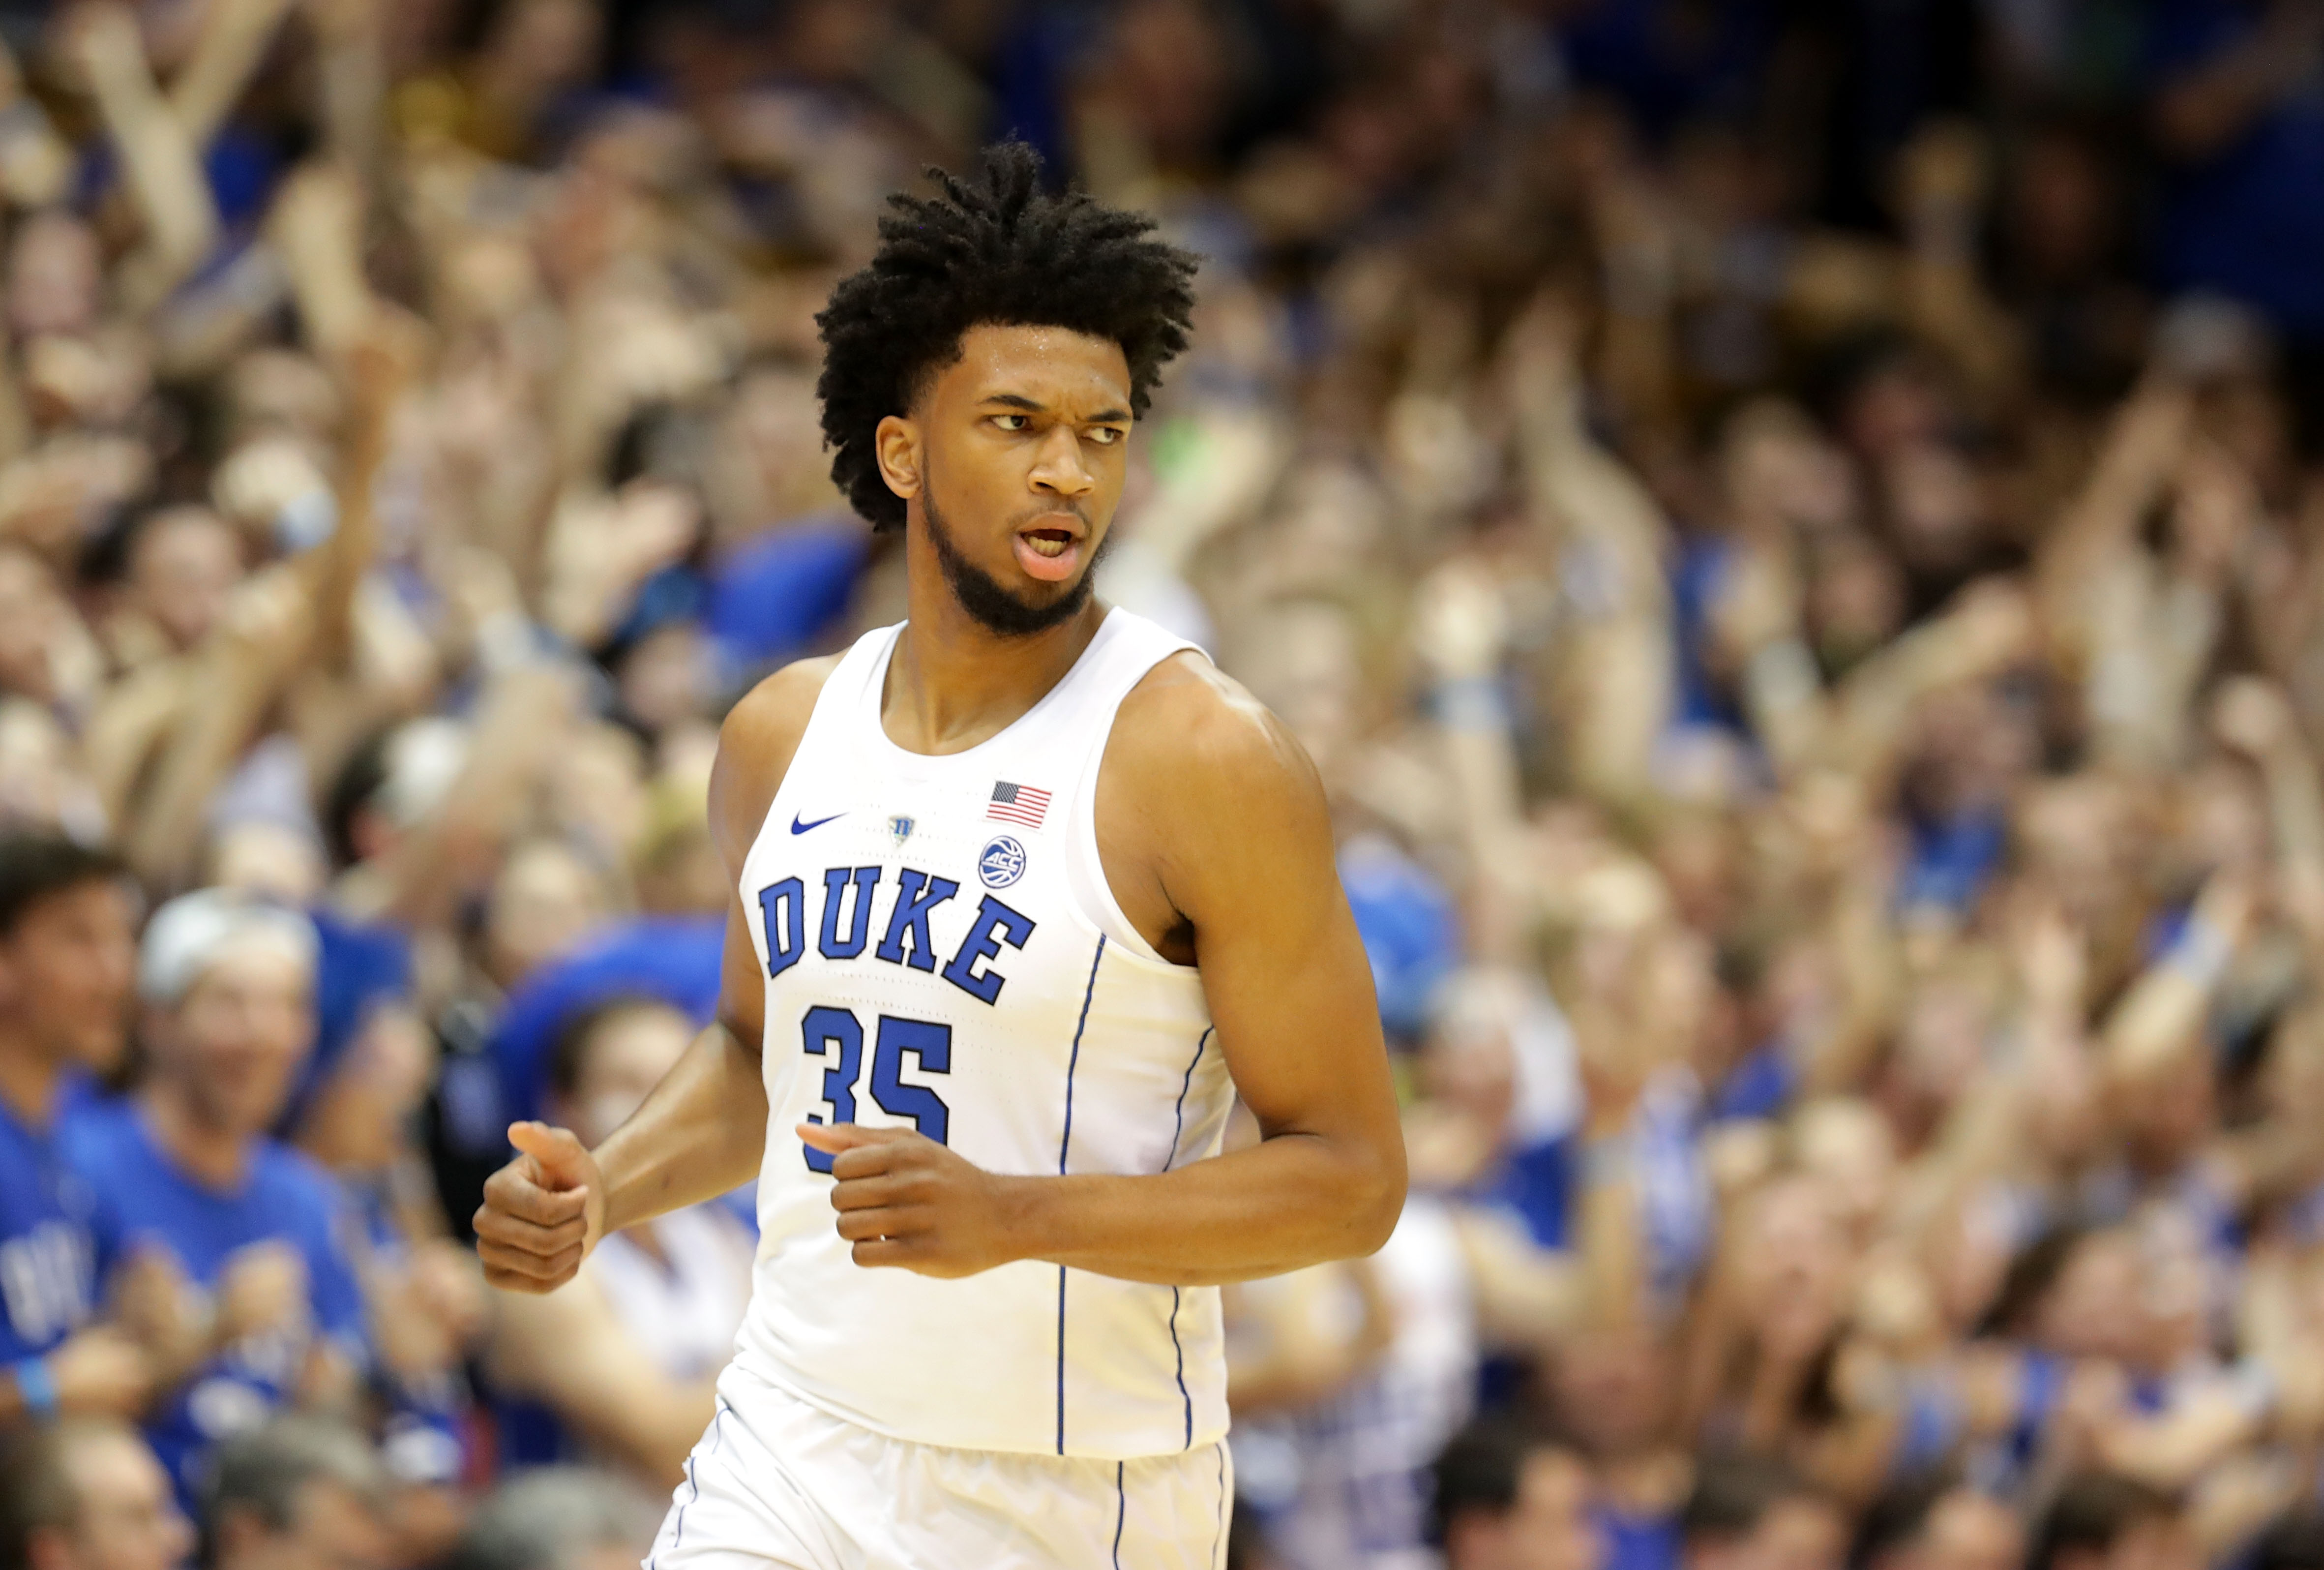 Duke basketball, Marvin Bagley merchandise given away by father  duplicated, sold online